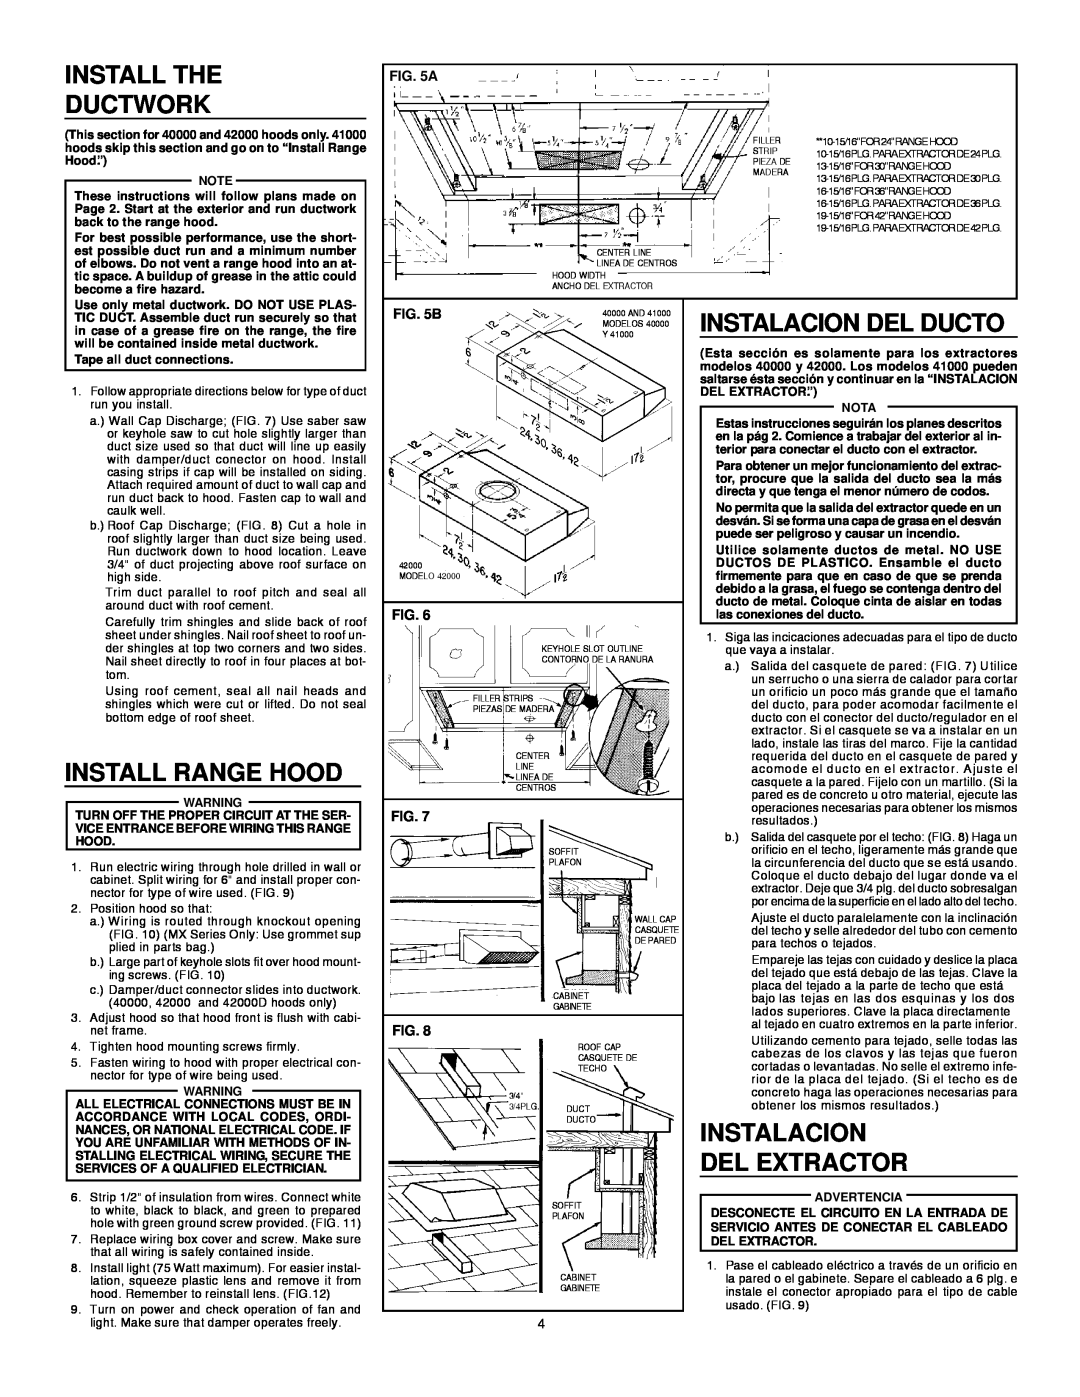 Broan 413623 installation instructions Install The Ductwork, Install Range Hood, Del Extractor, Instalacion Del Ducto, A, B 